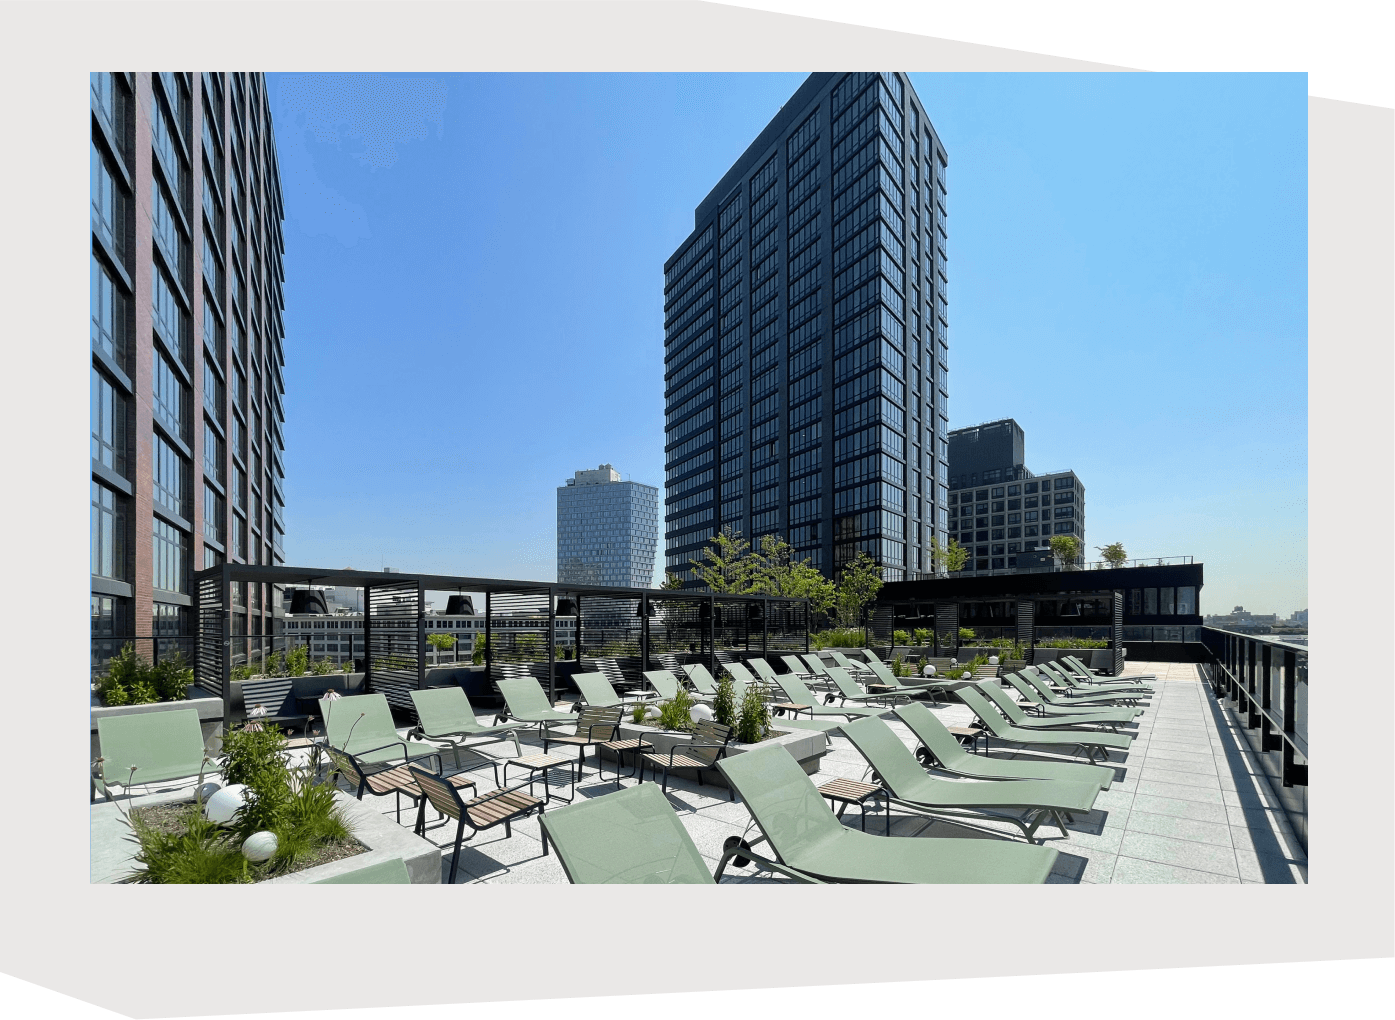 The sundeck of 595 Dean St during the daytime with deck chairs in the foreground and the East Tower and open sky in the background.